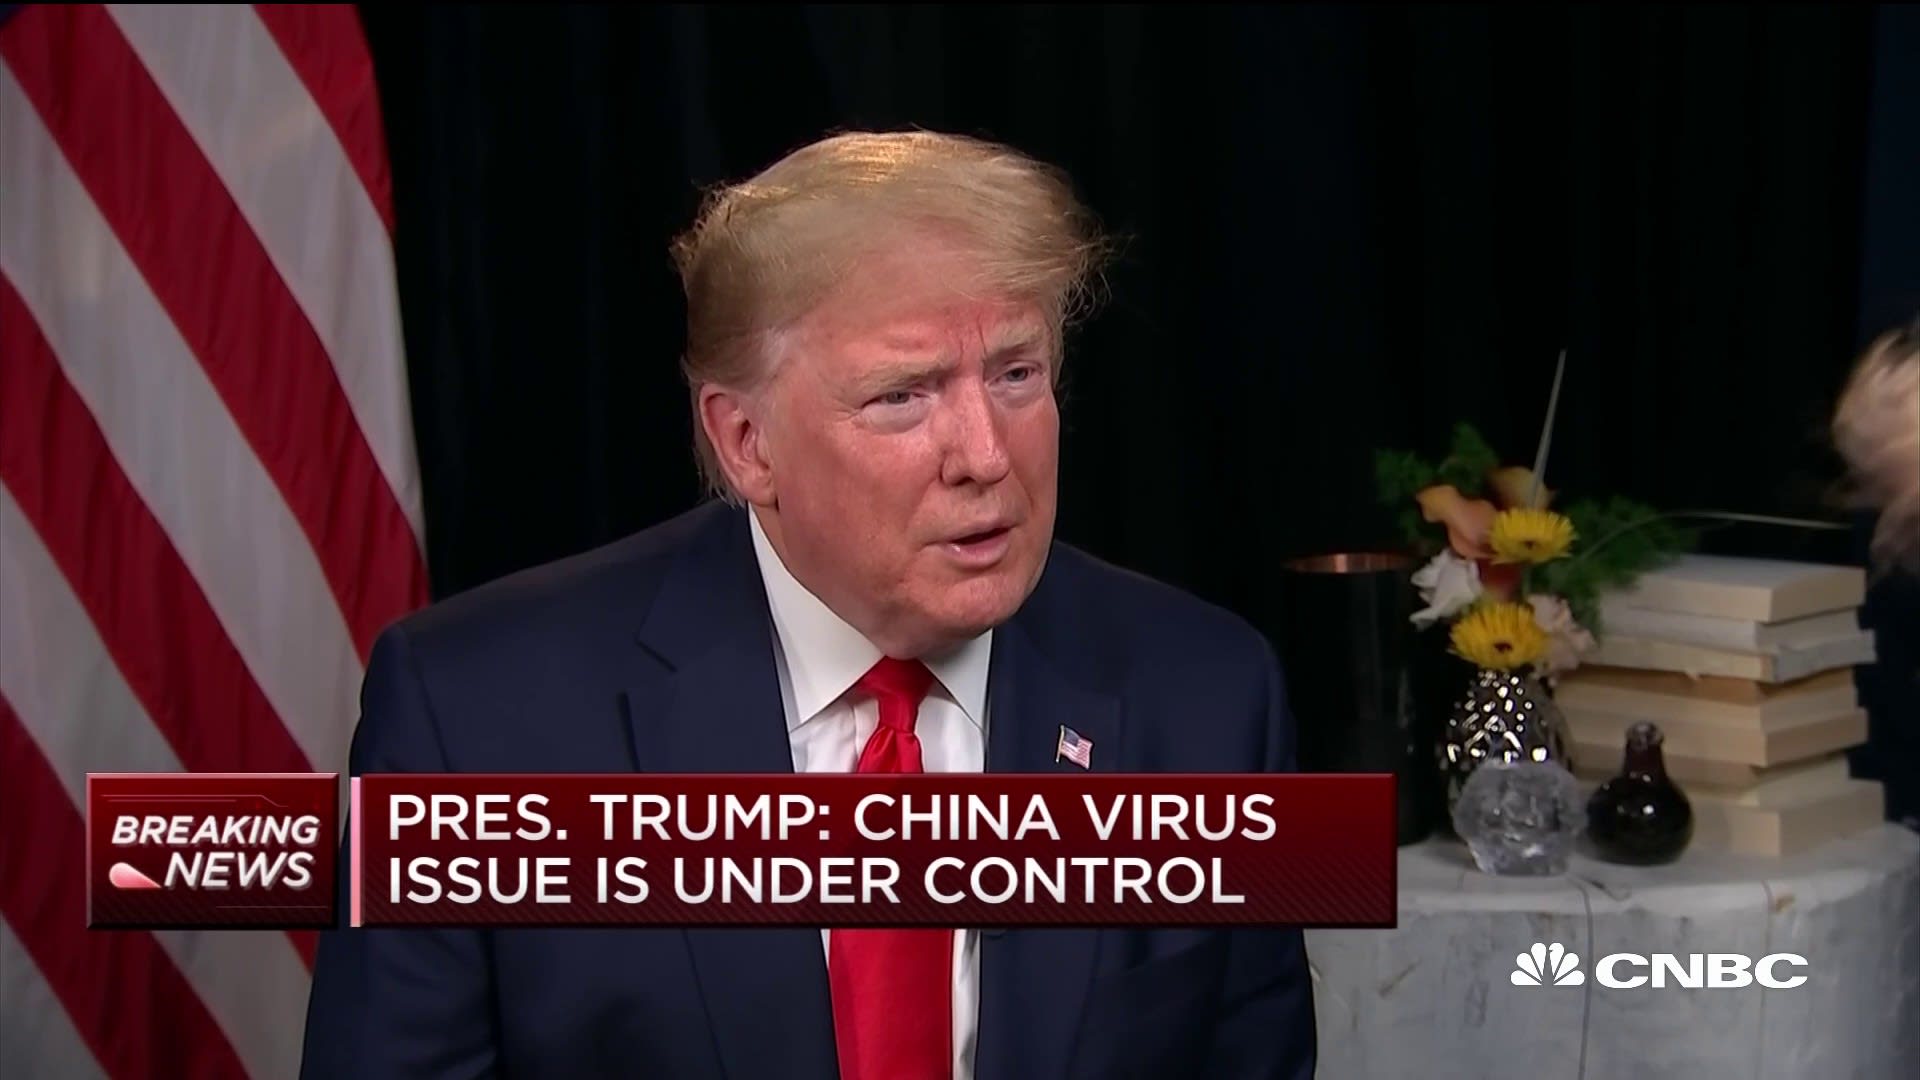 Trump on coronavirus from China: 'We have it totally under control